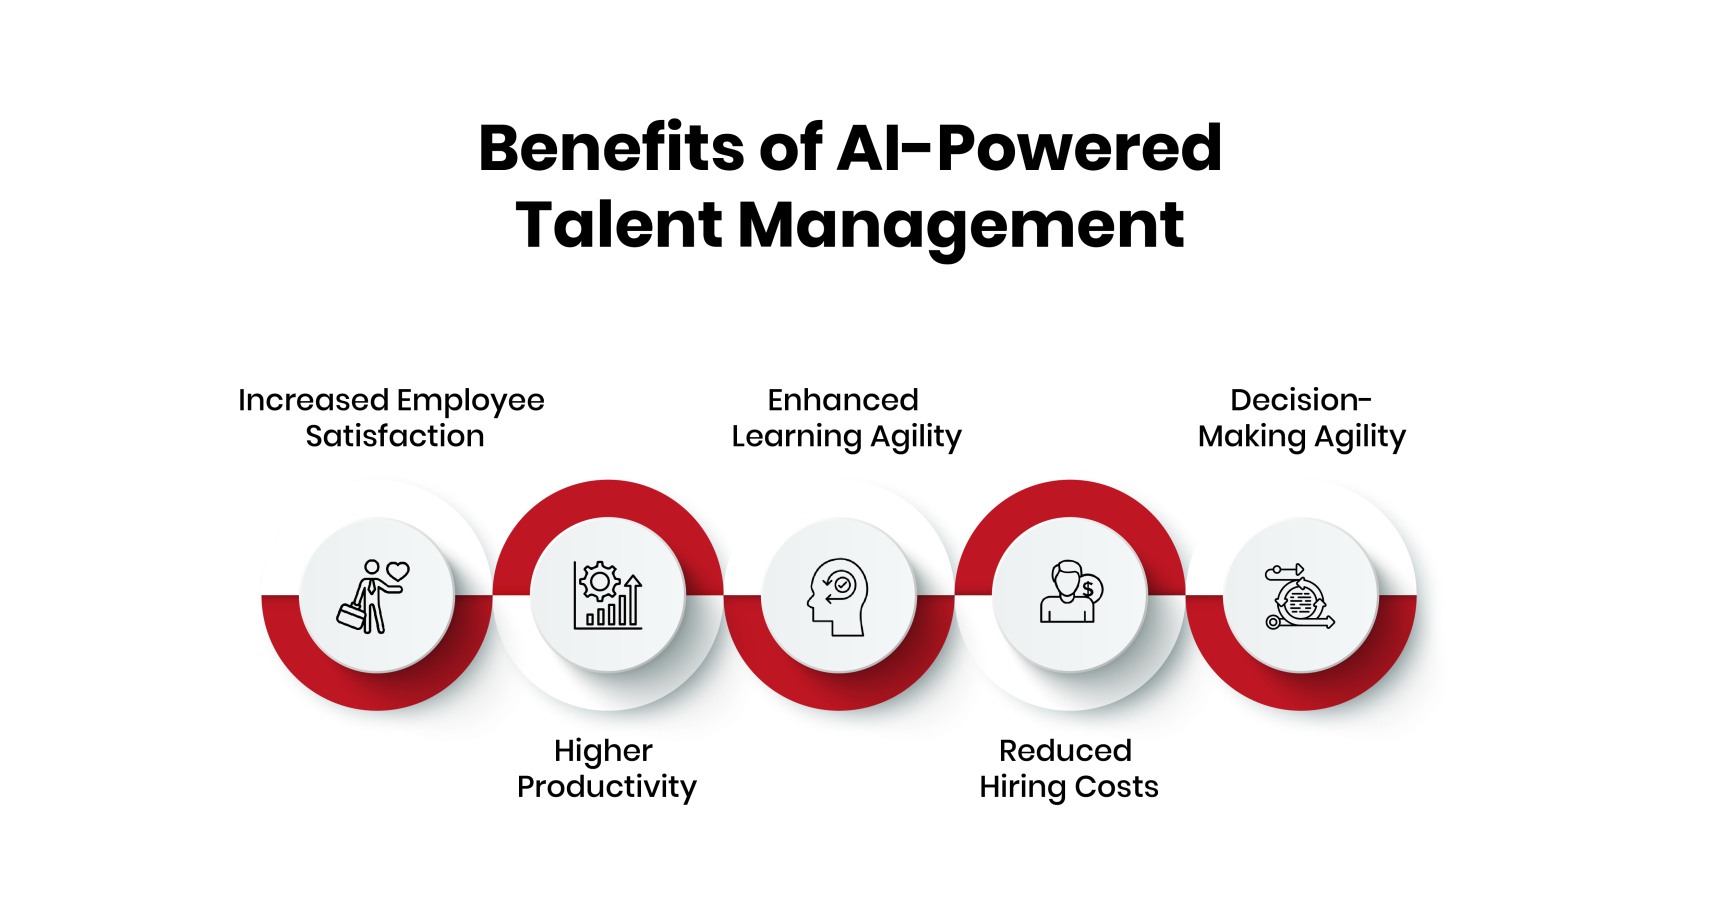 The Benefits of AI-Powered Talent Management 